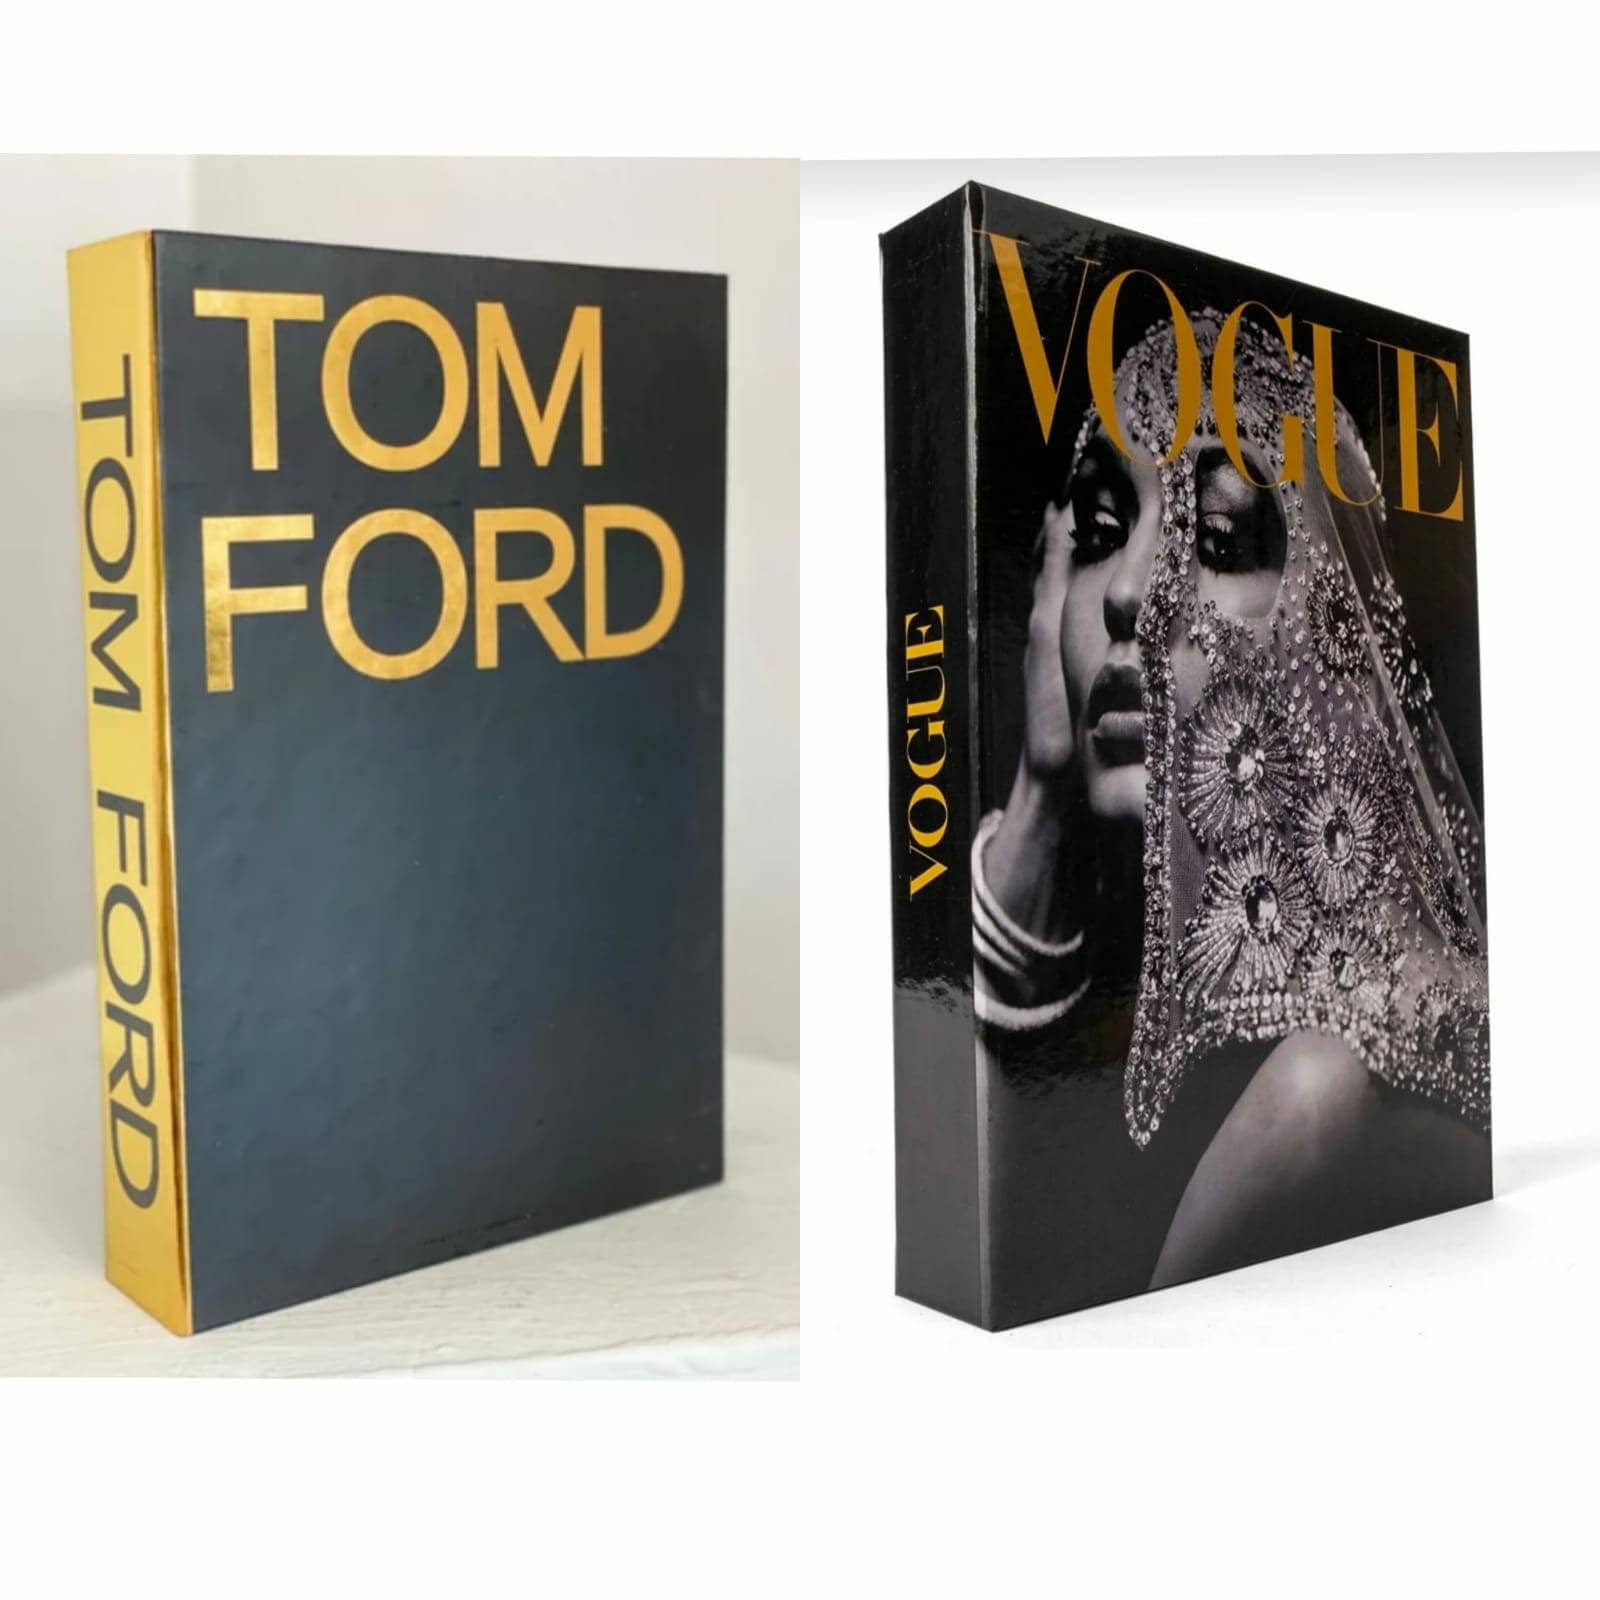 Tom Ford-vogue Coffee Table Booksopenable Book Boxfake Book - Etsy